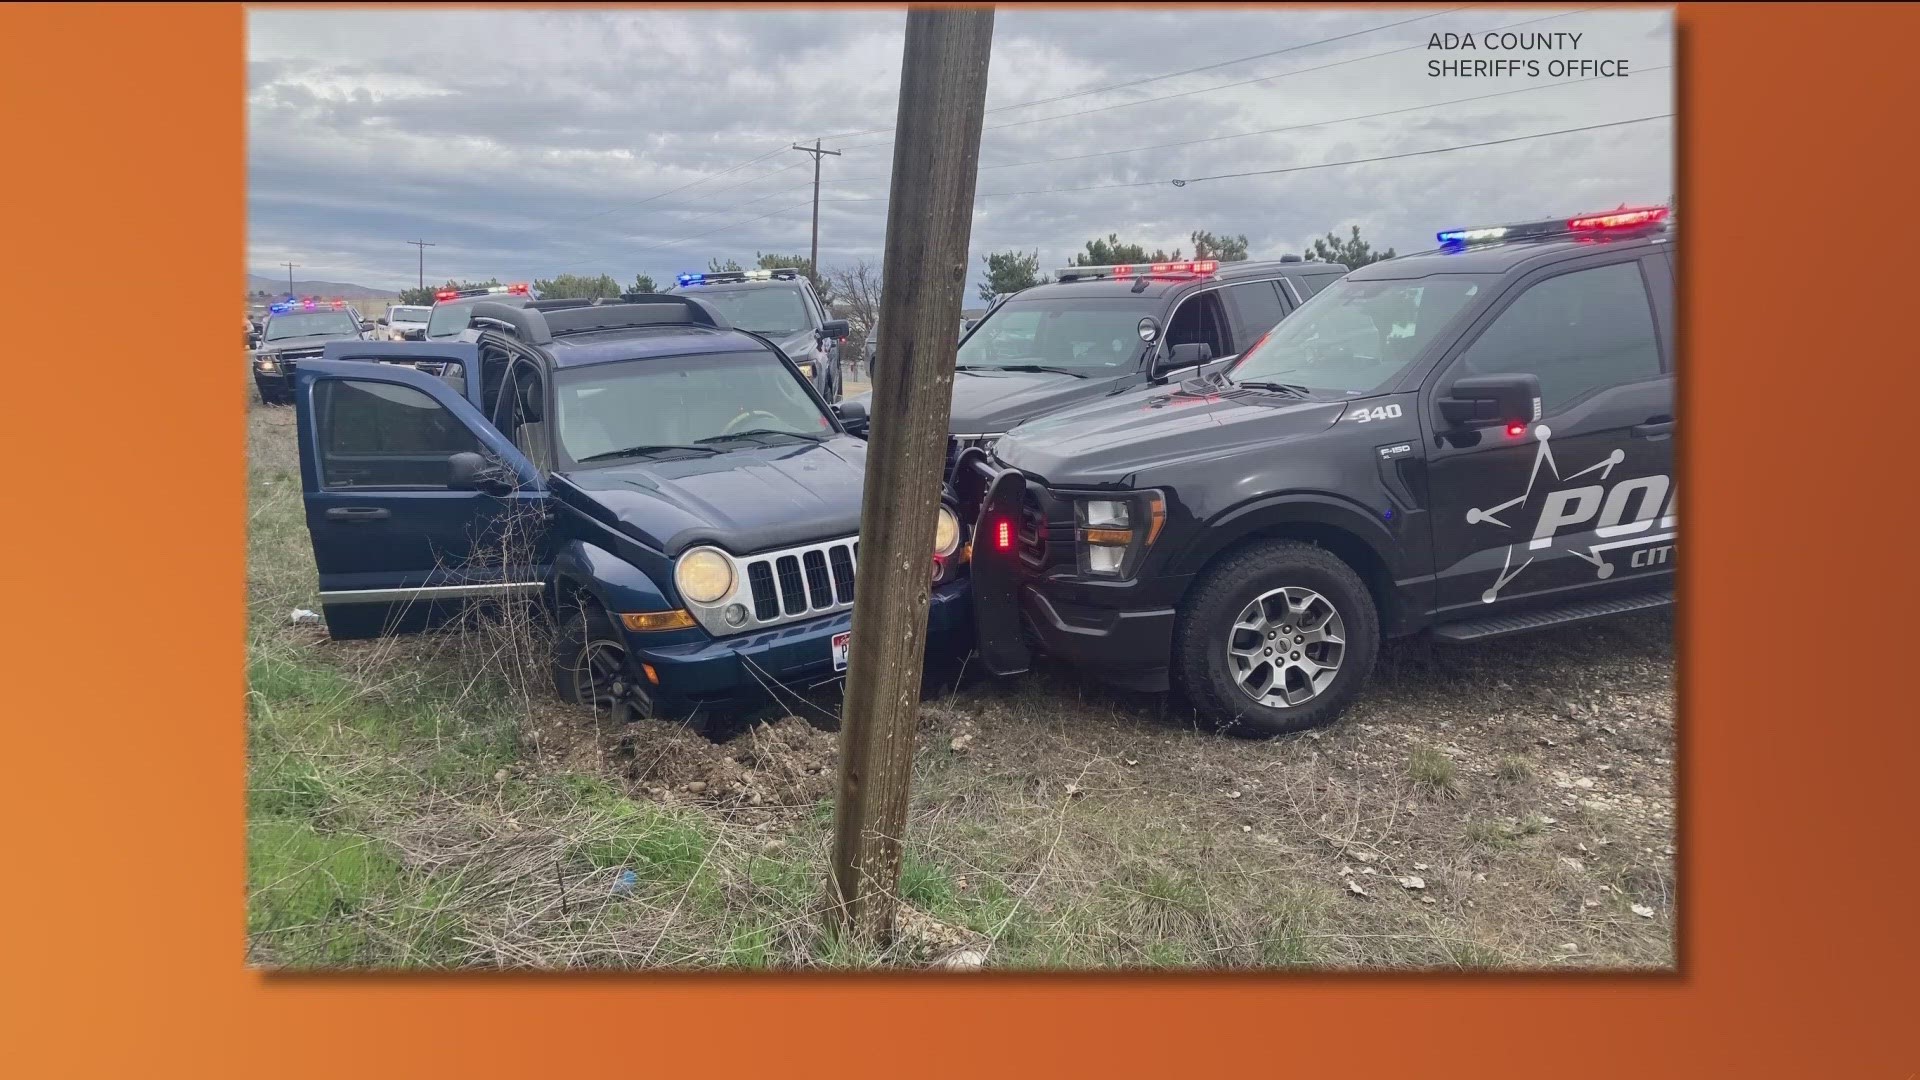 Ada County Sheriff's Office said the chase started in Boise County north of Horseshoe Bend, continued into Ada County on SH55, and ended in Eagle.